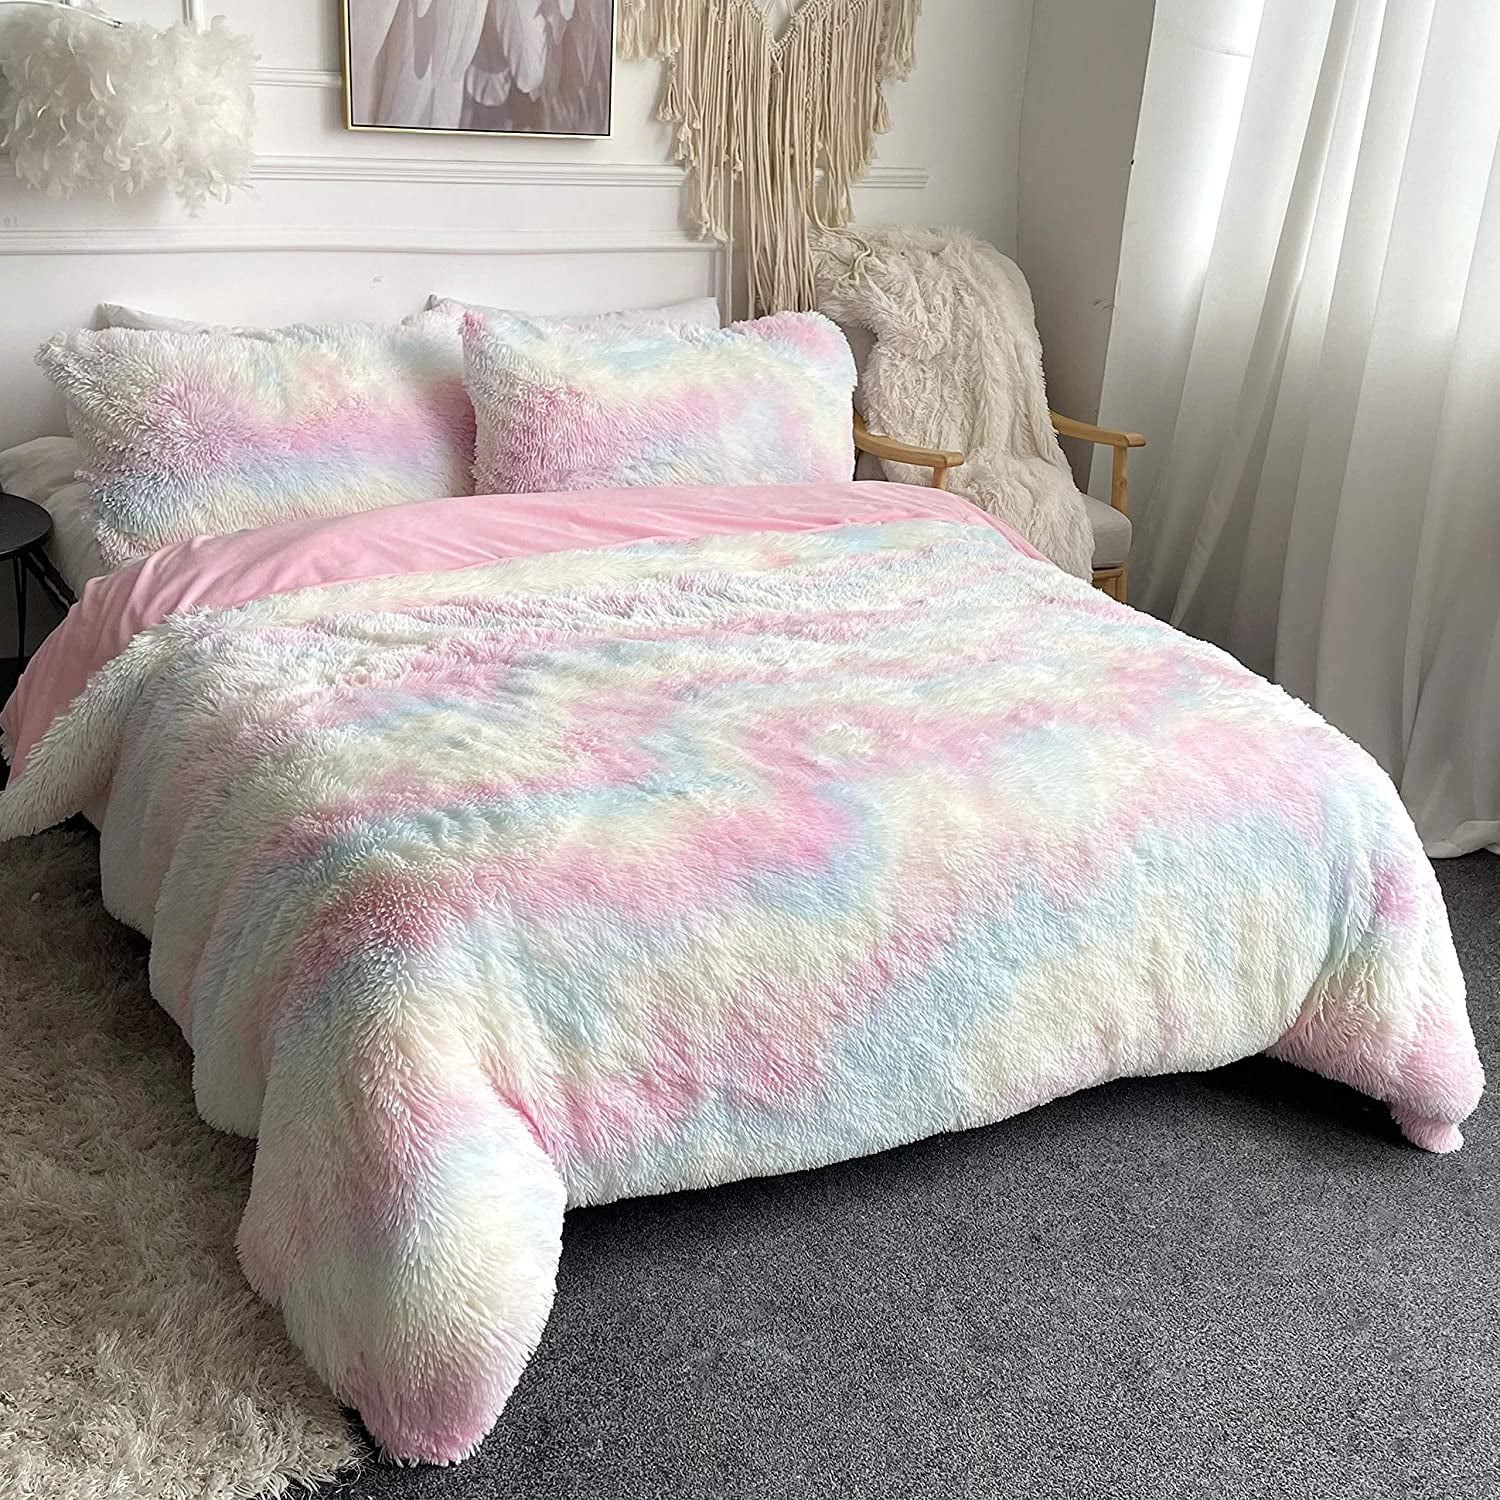 Thermal Duvet Set Cover Teddy Warm Adult Cosy Quilt Fuzzy Double King UK Bedding 